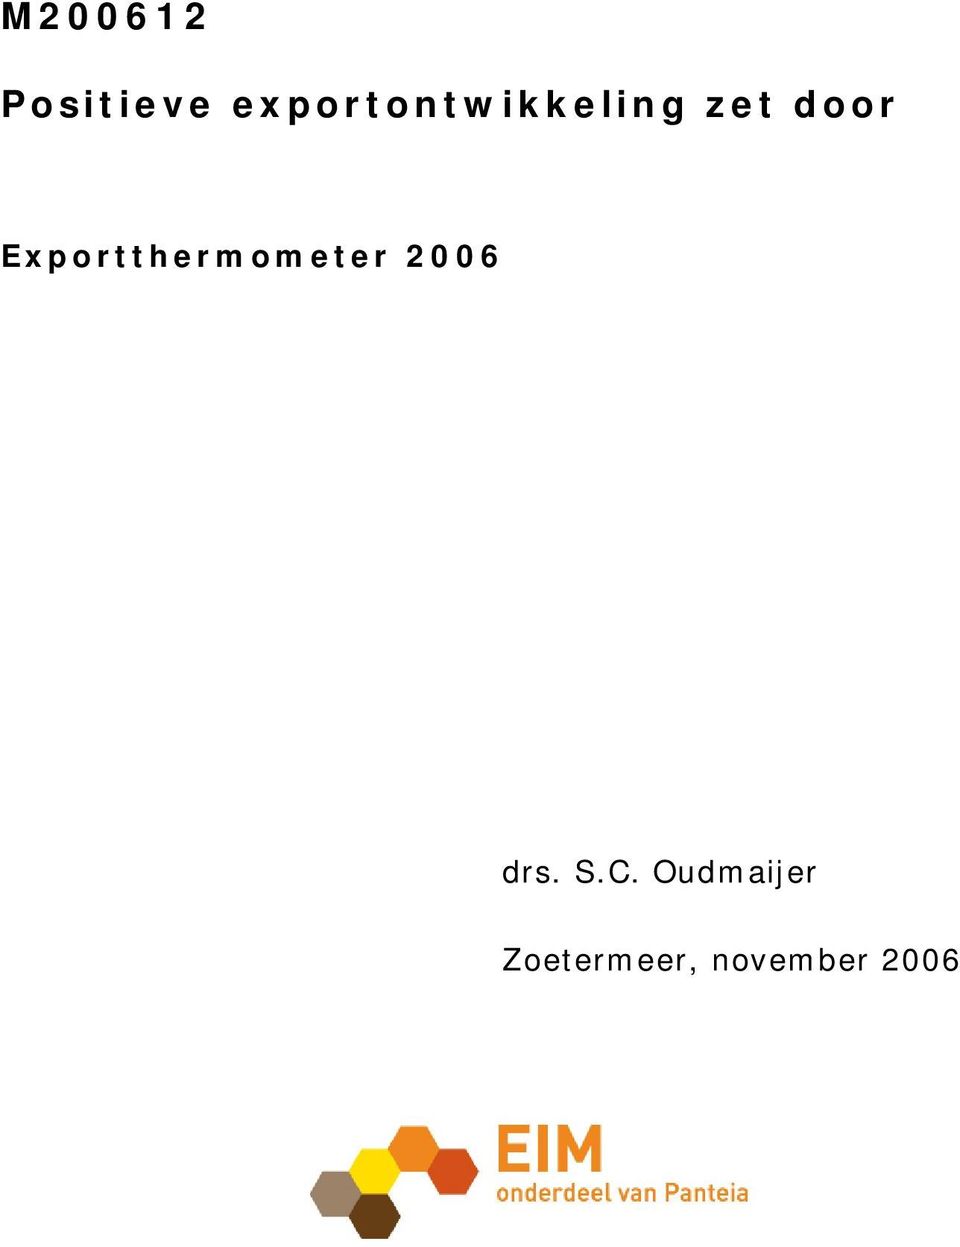 Exportthermometer 2006 drs.